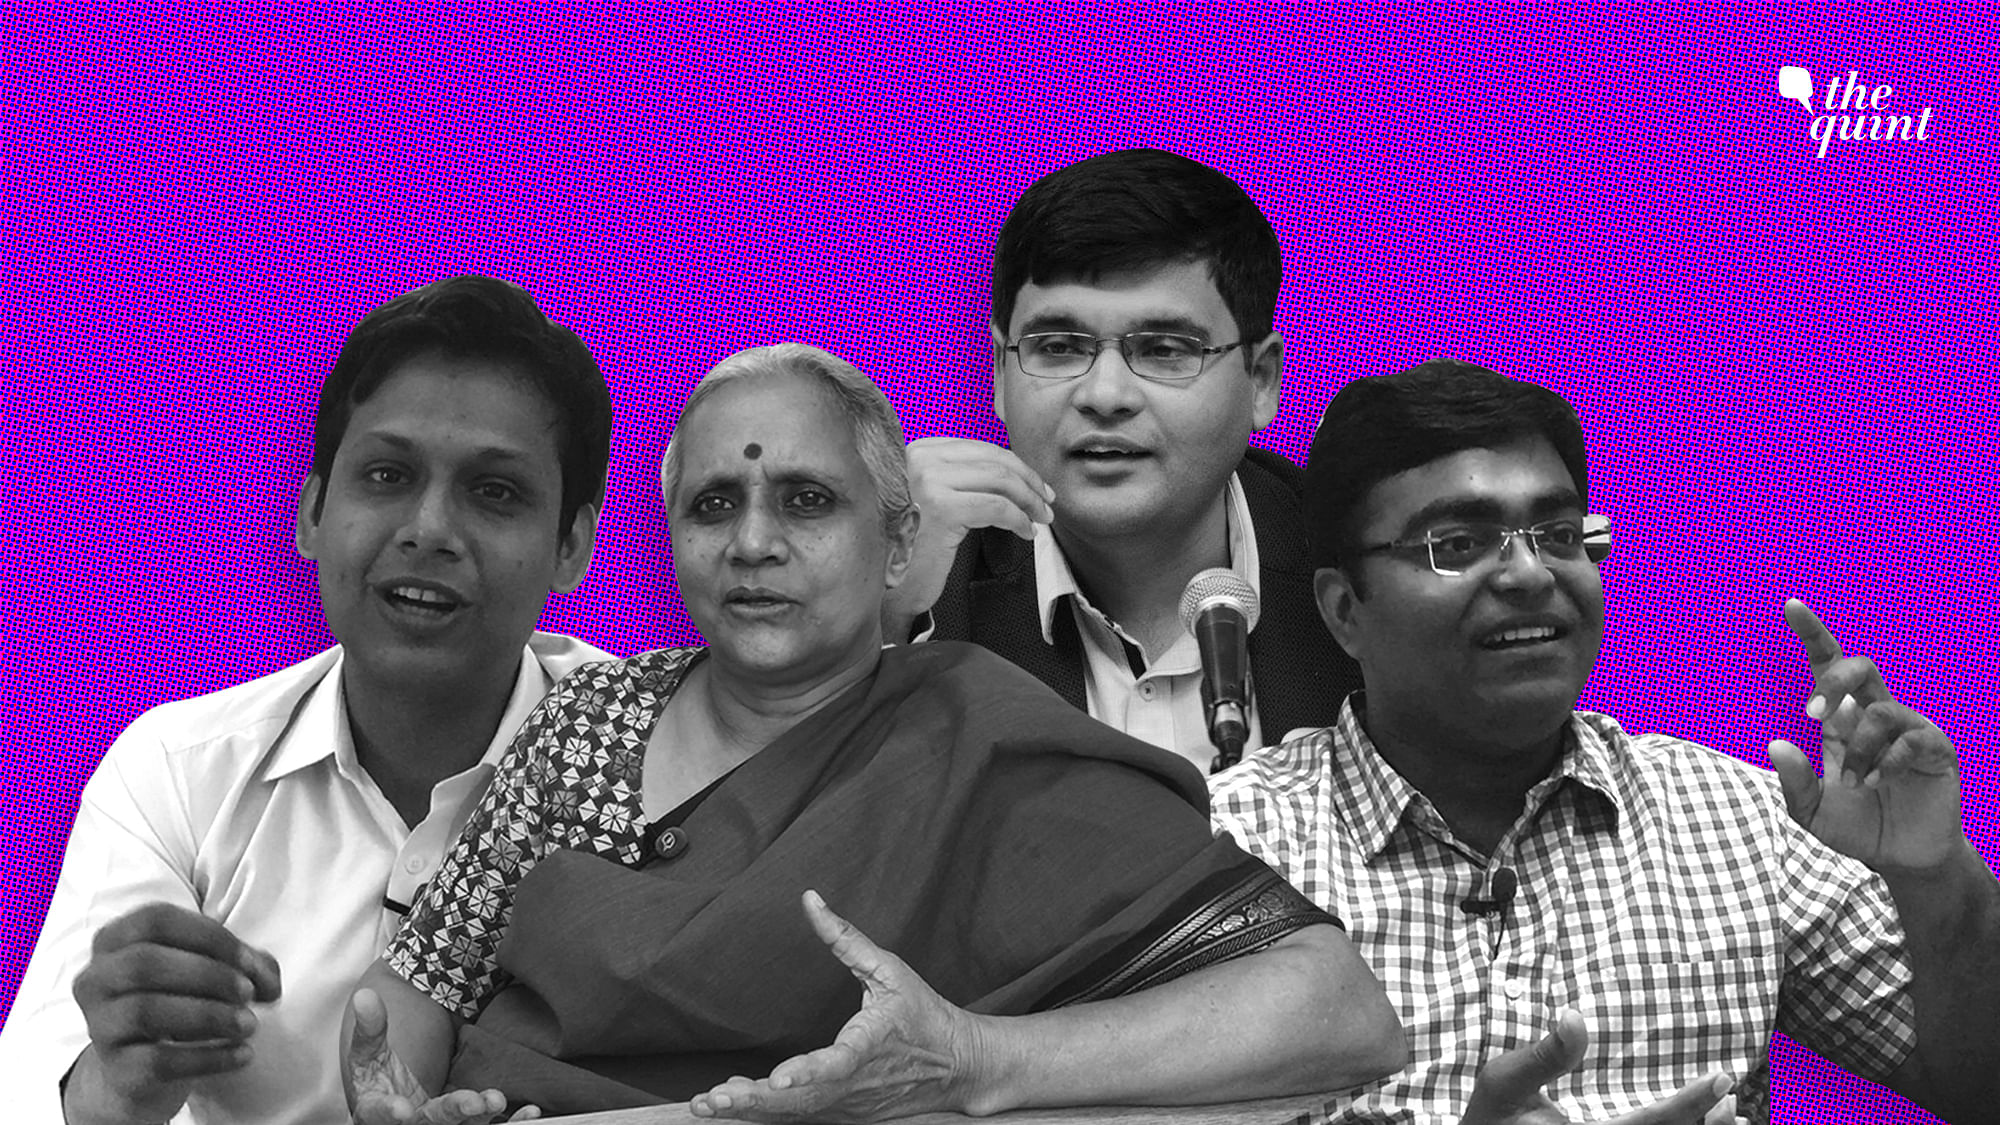 The Quint got experts to weigh in on where the fundamental right to privacy stands on the first anniversary of the landmark Supreme Court judgment.